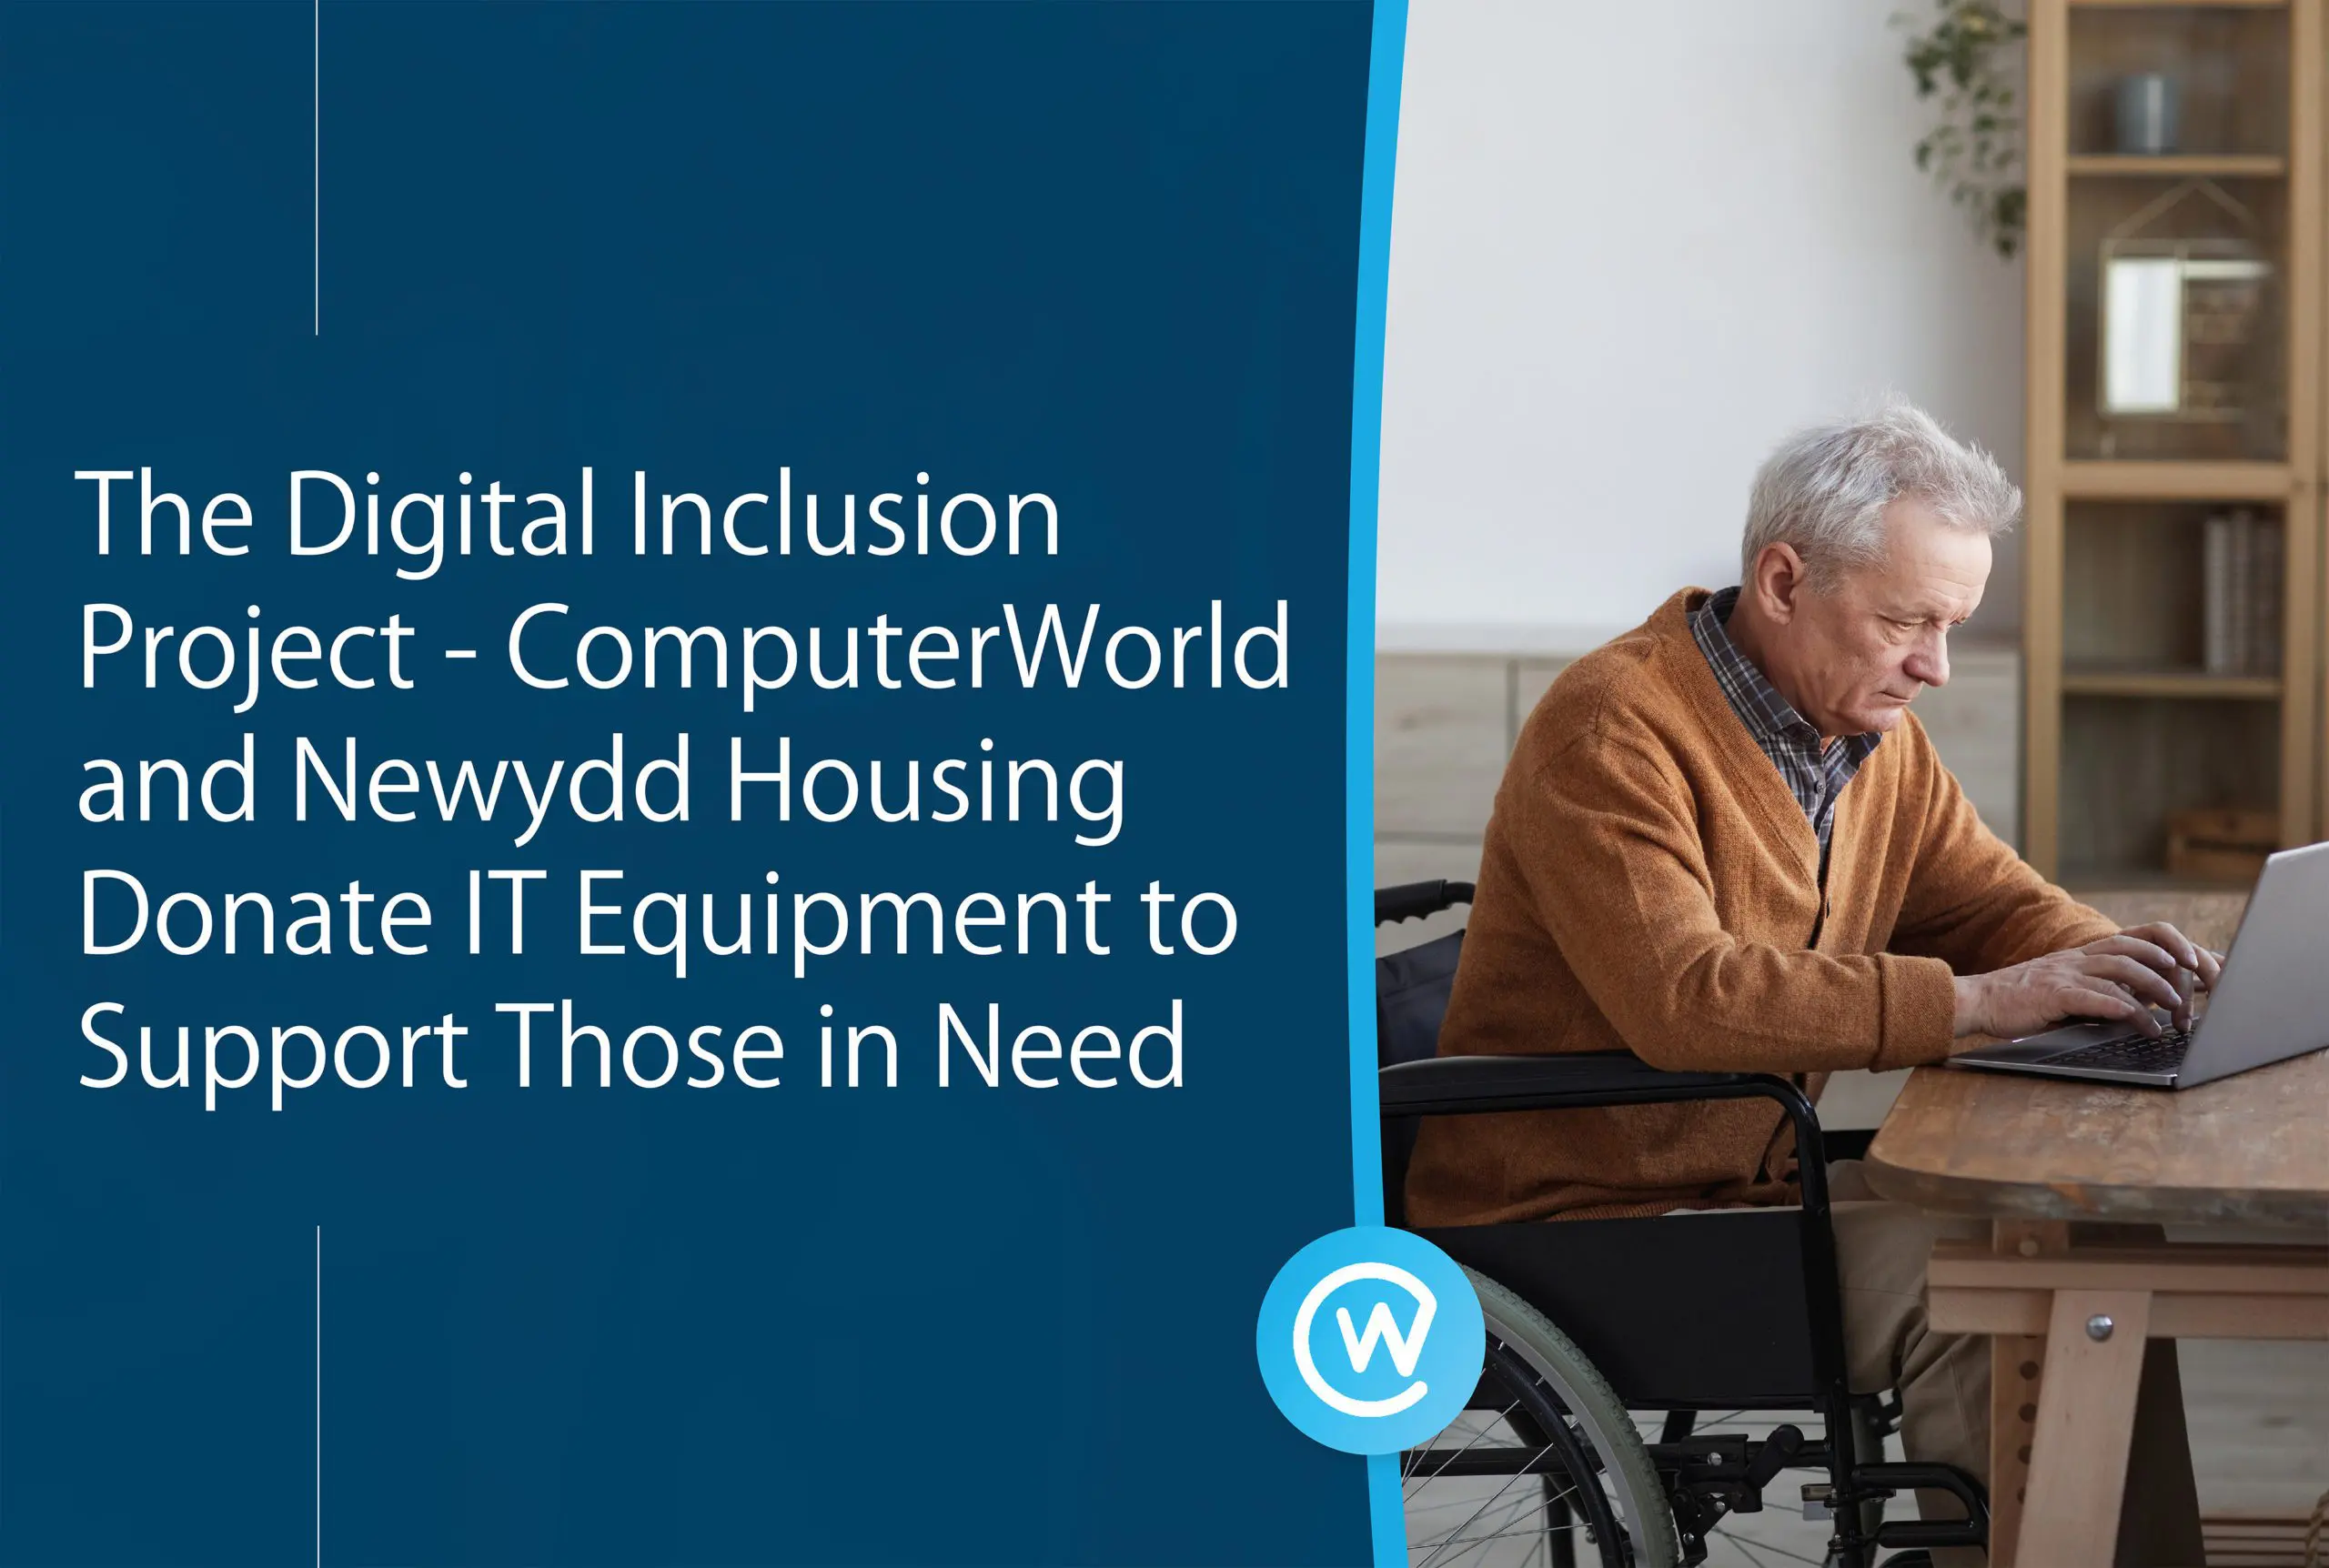 The Digital Inclusion Project – ComputerWorld and Newydd Housing Donate IT Equipment to Support Those in Need